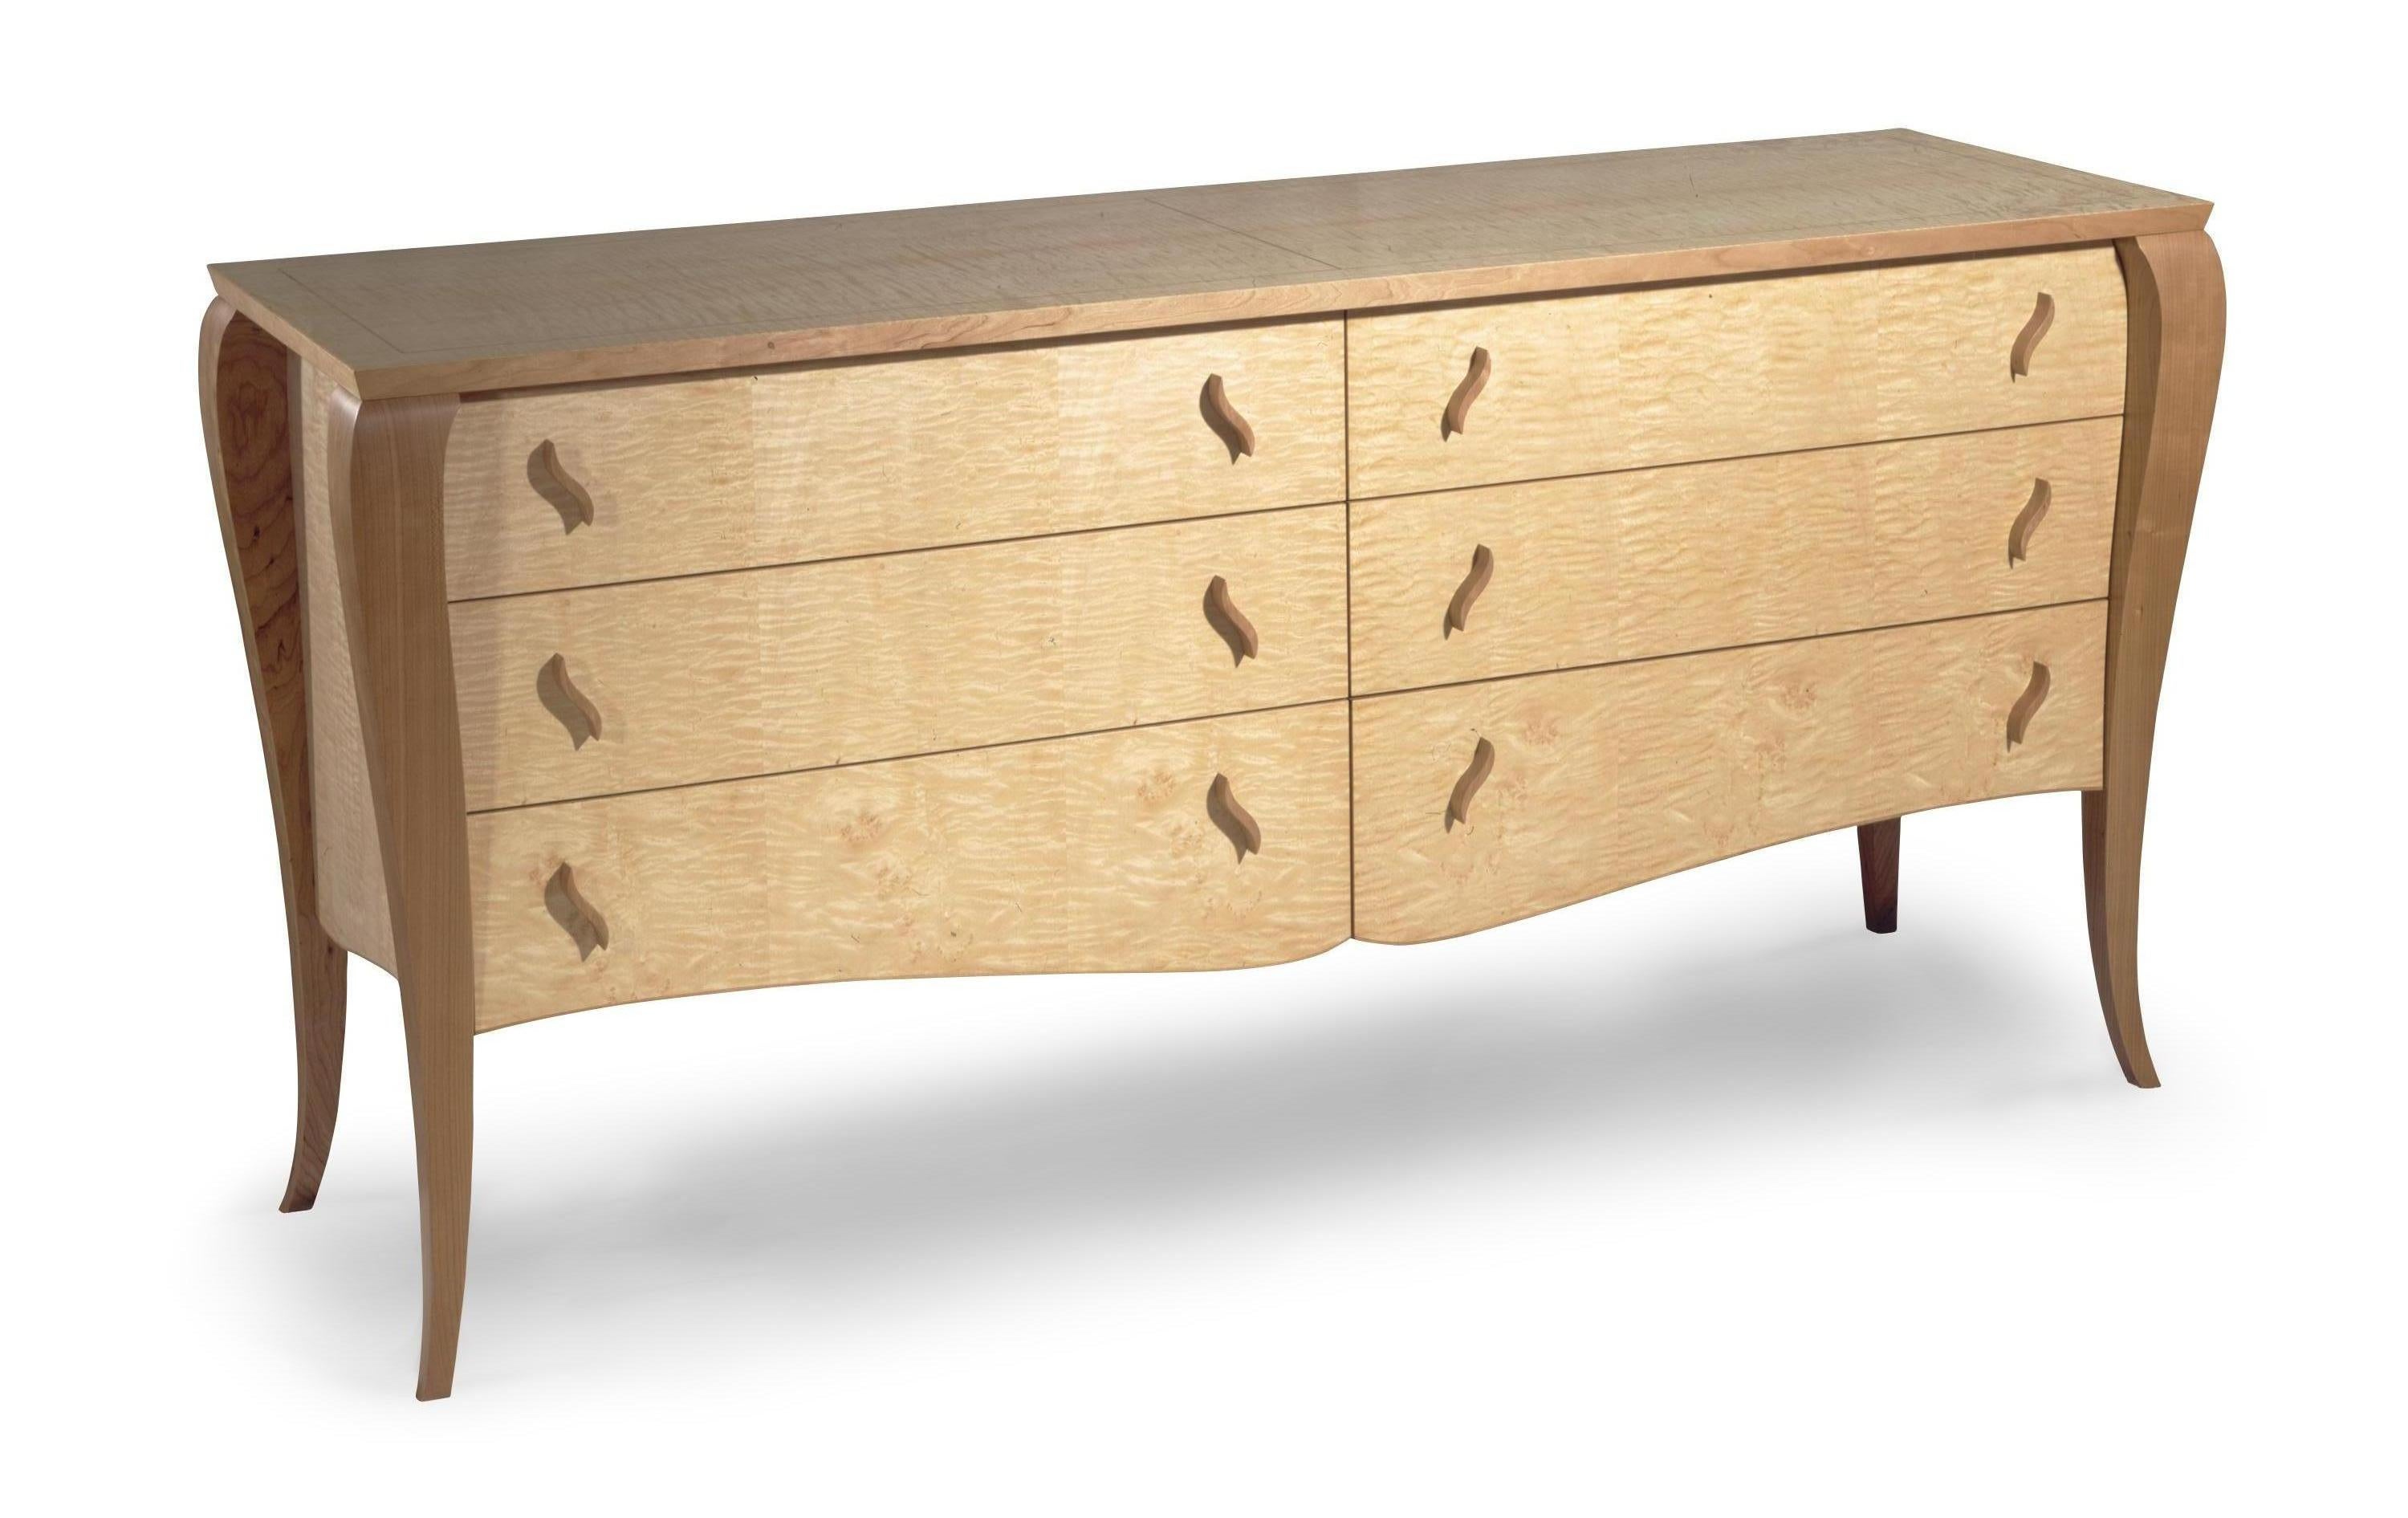 Gazelle Sideboard, Handcrafted Contemporary Credenza with Art Deco Style For Sale 1